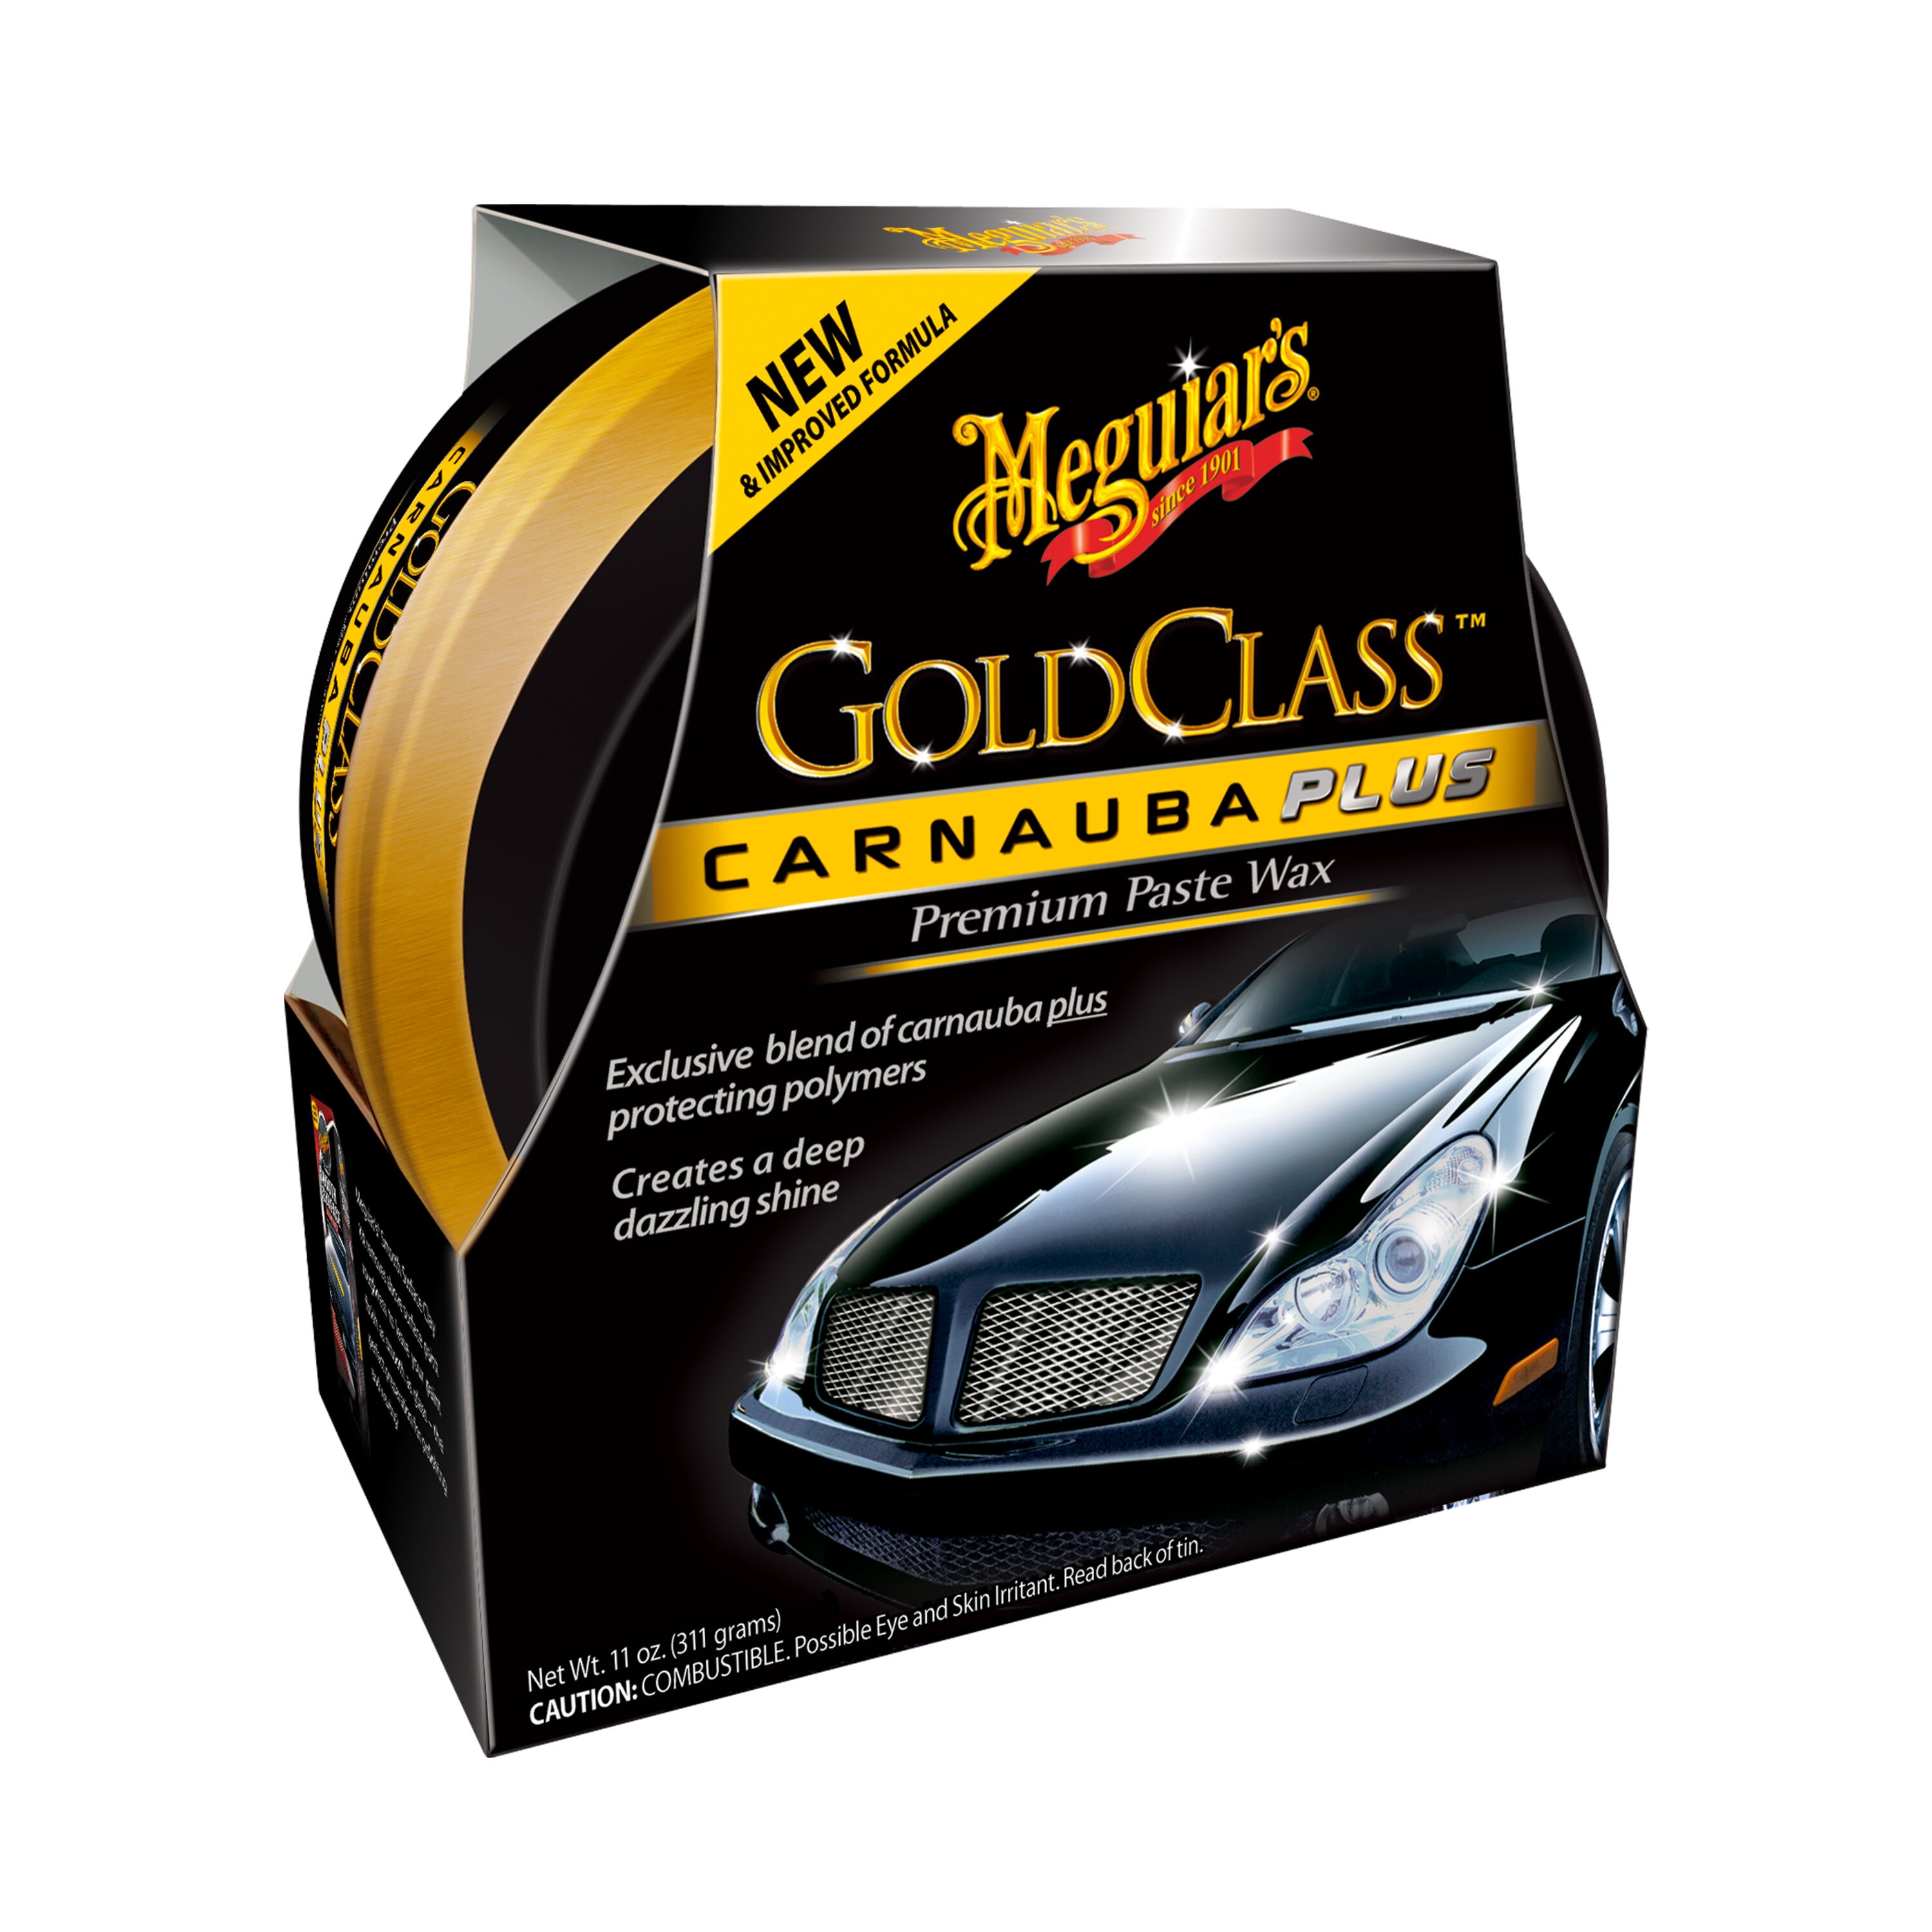 Meguiars, Shop our Full Range by Brand at Autobarn